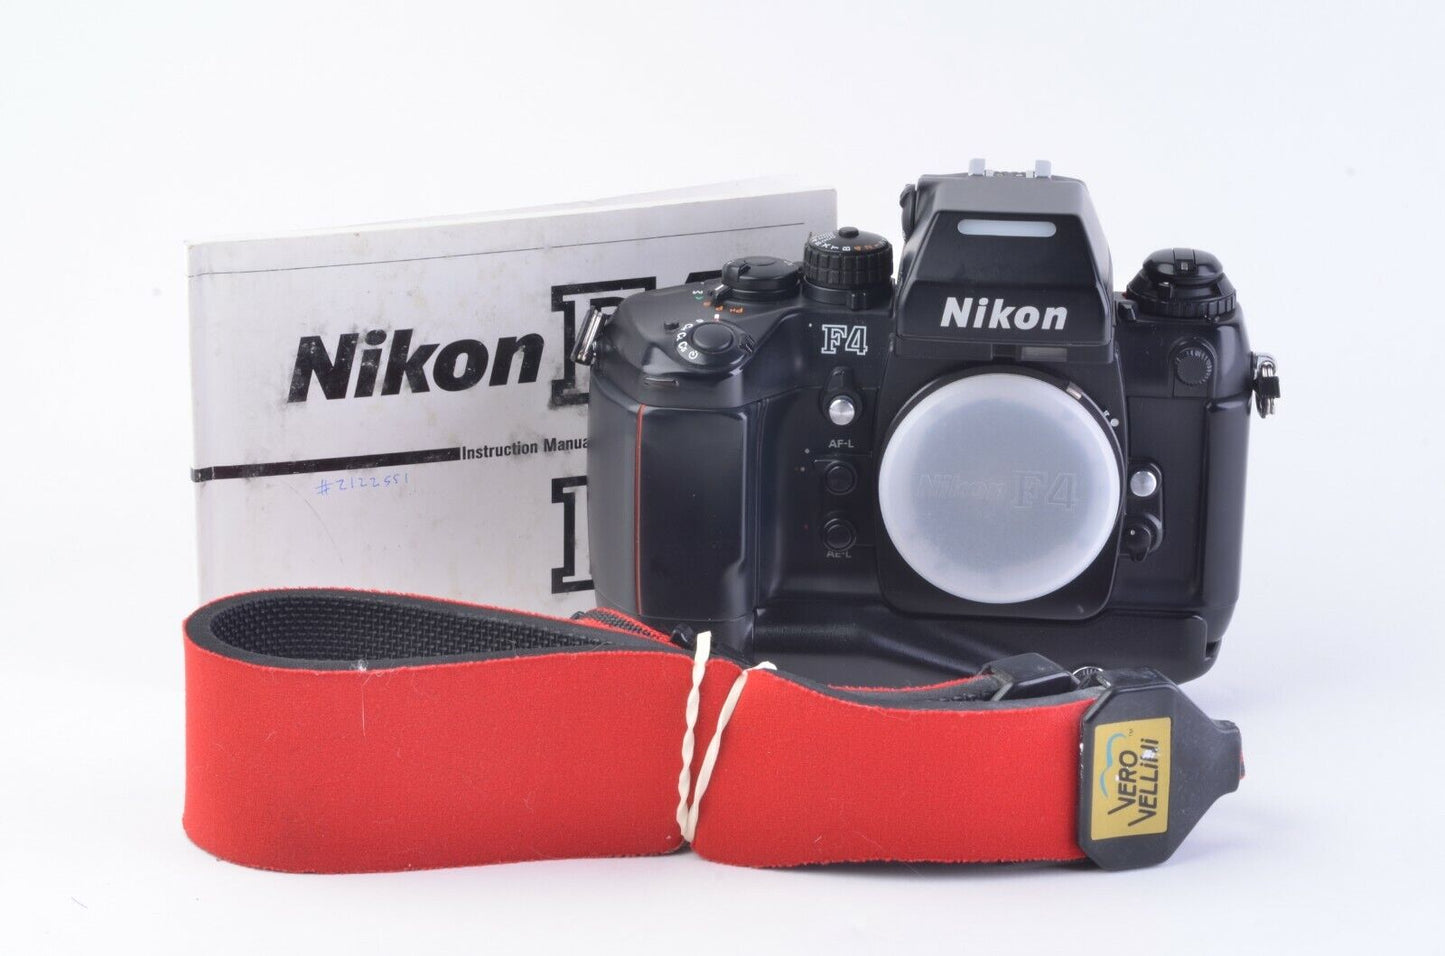 EXC++ NIKON F4s 35mm BODY, MANUAL, CLEAN, TESTED, ACCURATE, + NEO STRAP